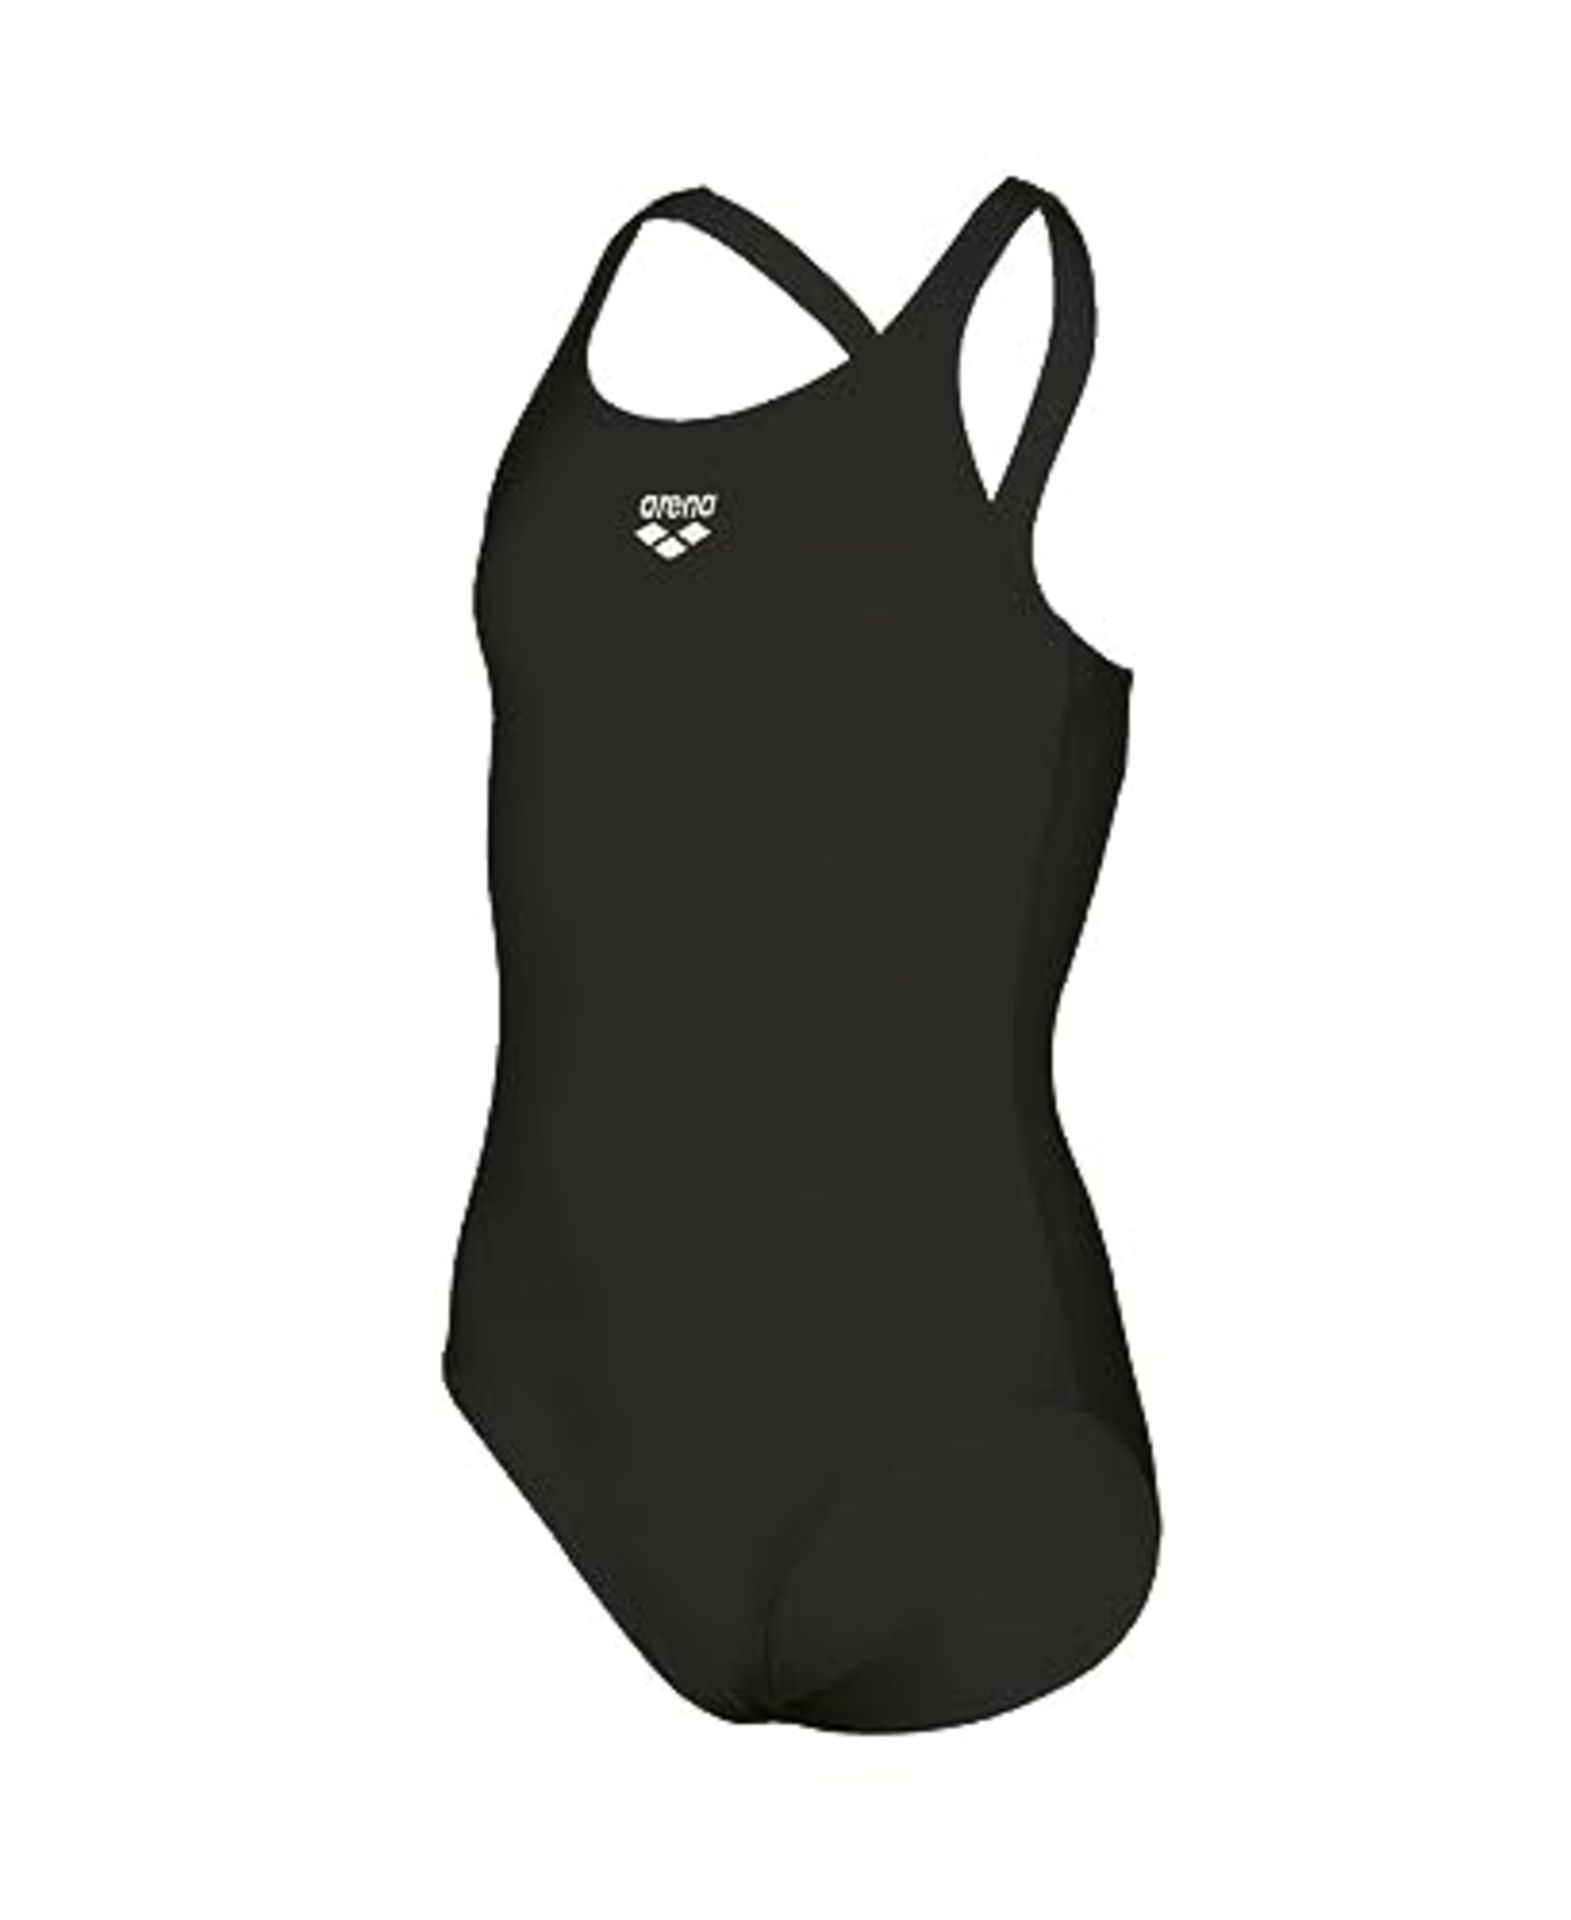 arena Dynamo Junior R Girl's One-piece Swimsuit, Sports Swimsuit in Chlorine and Salt